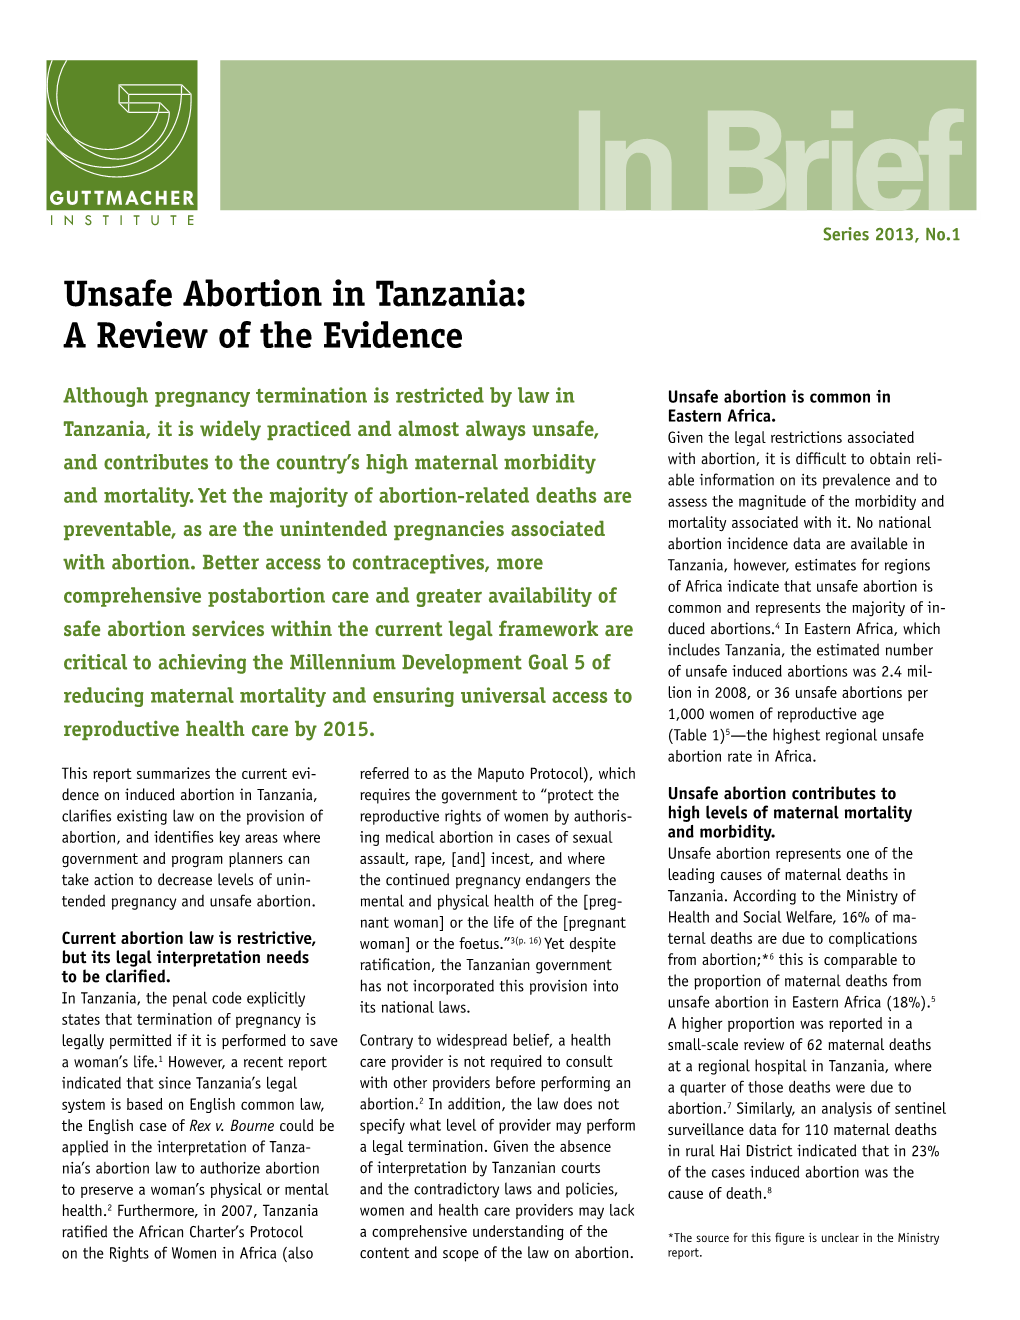 Unsafe Abortion in Tanzania: a Review of the Evidence